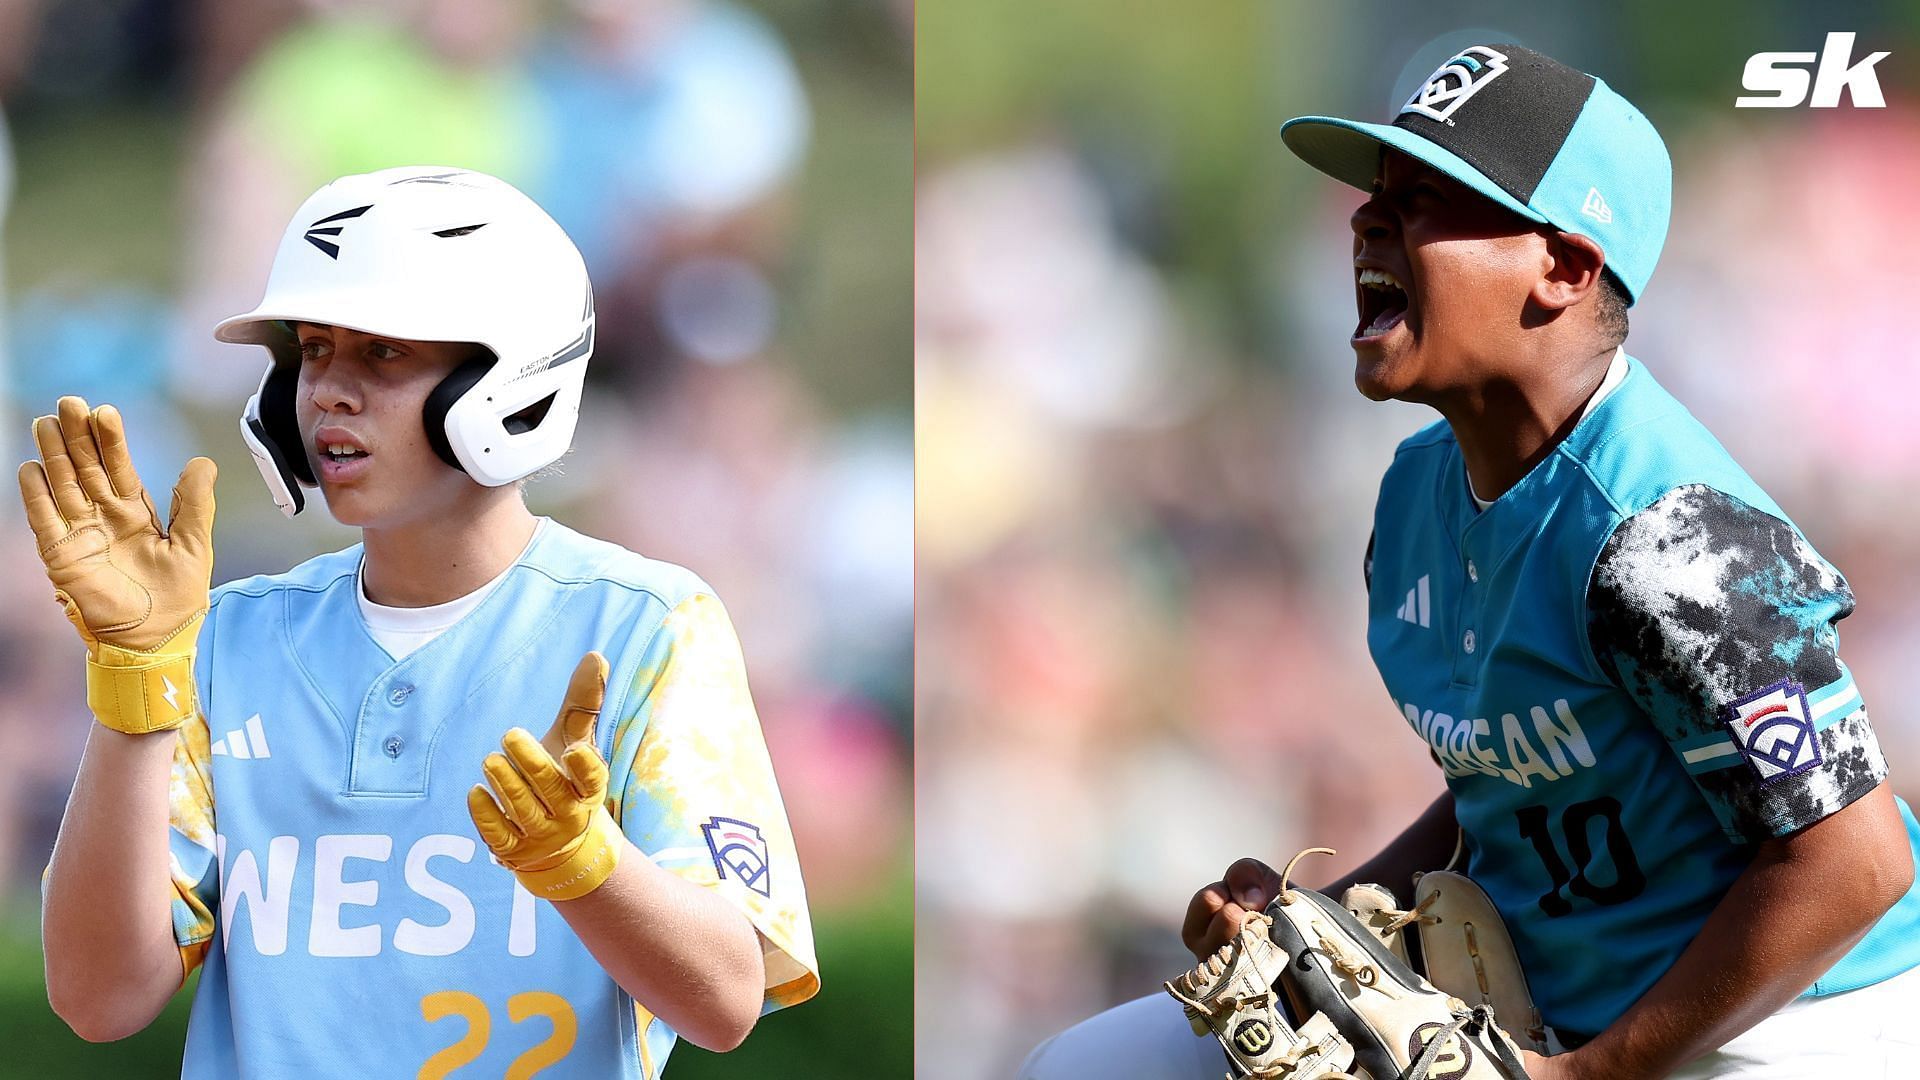 California overcame Curacao in stunning walk-off fashion at the Little League World Series